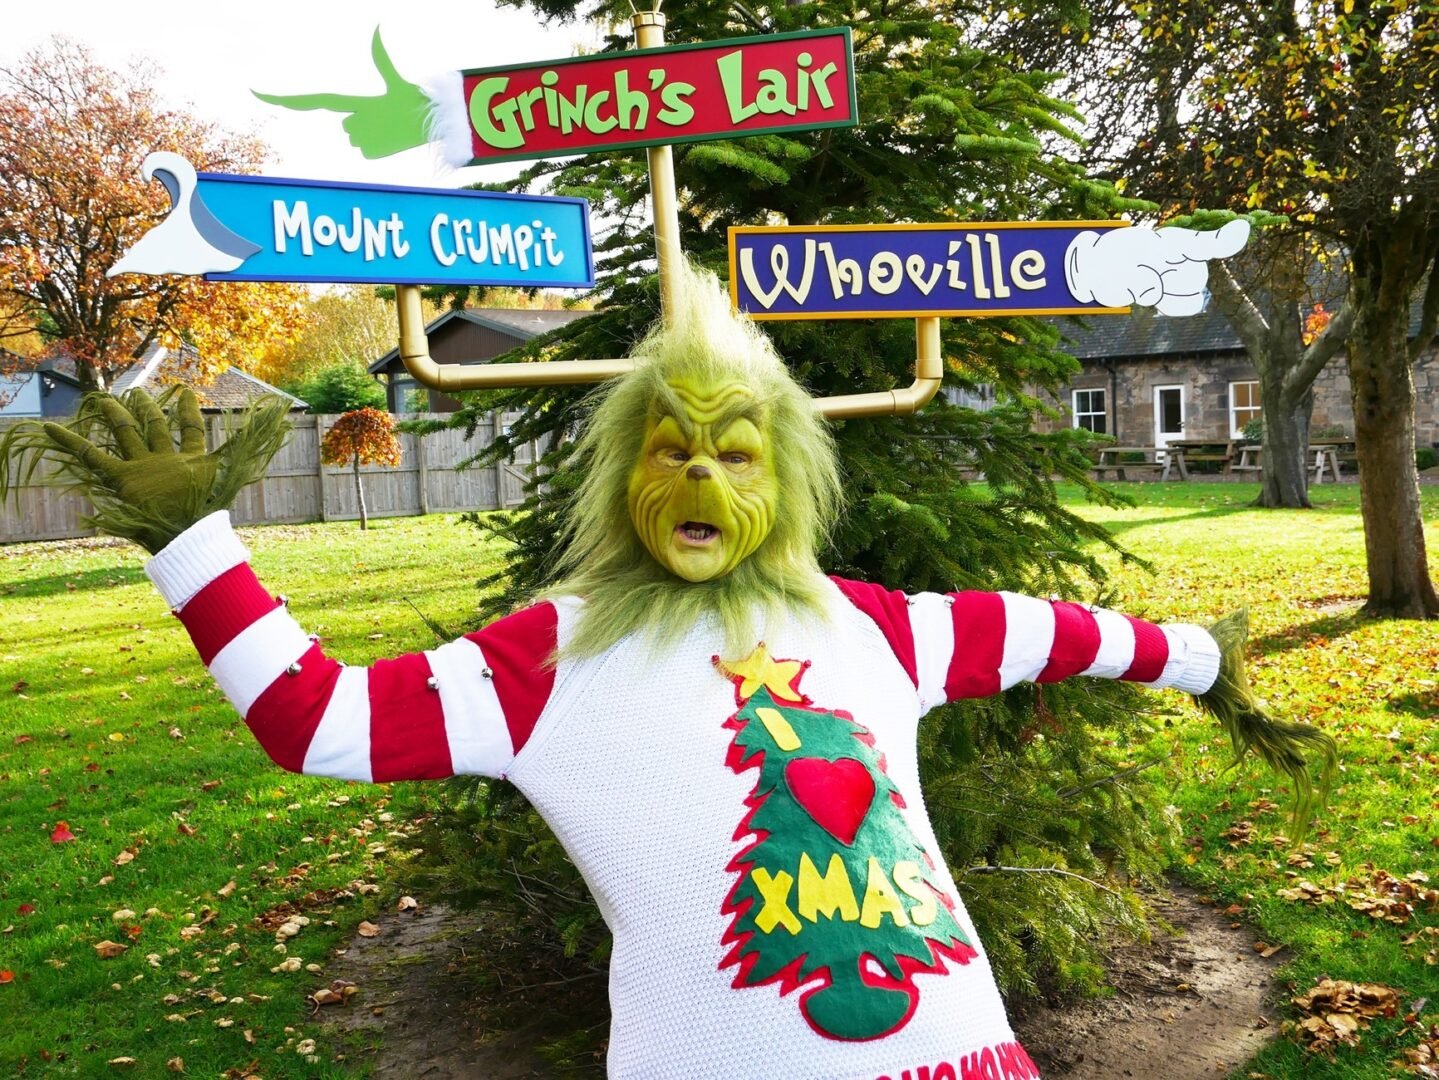 Member of Staff from Conifox dressed as the Grinch